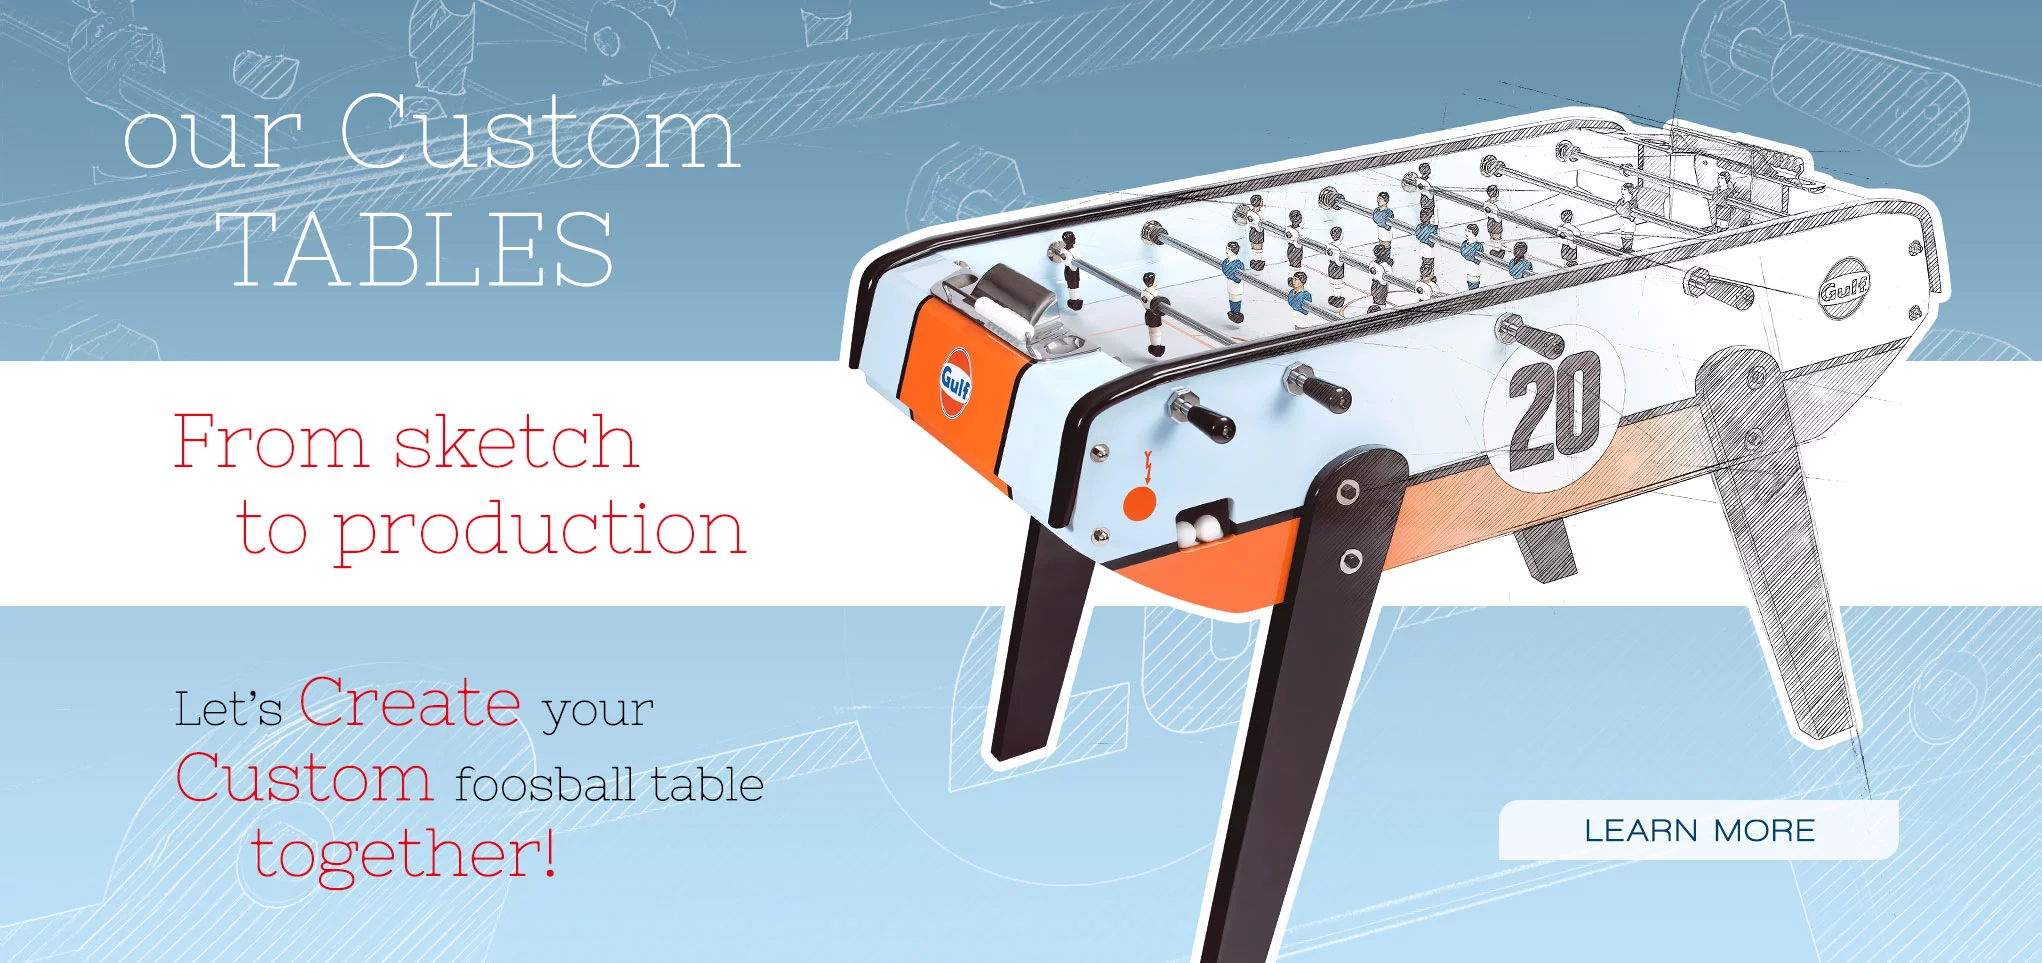 Our custom tables From sketch to production Let’s create your custom foosball table together!